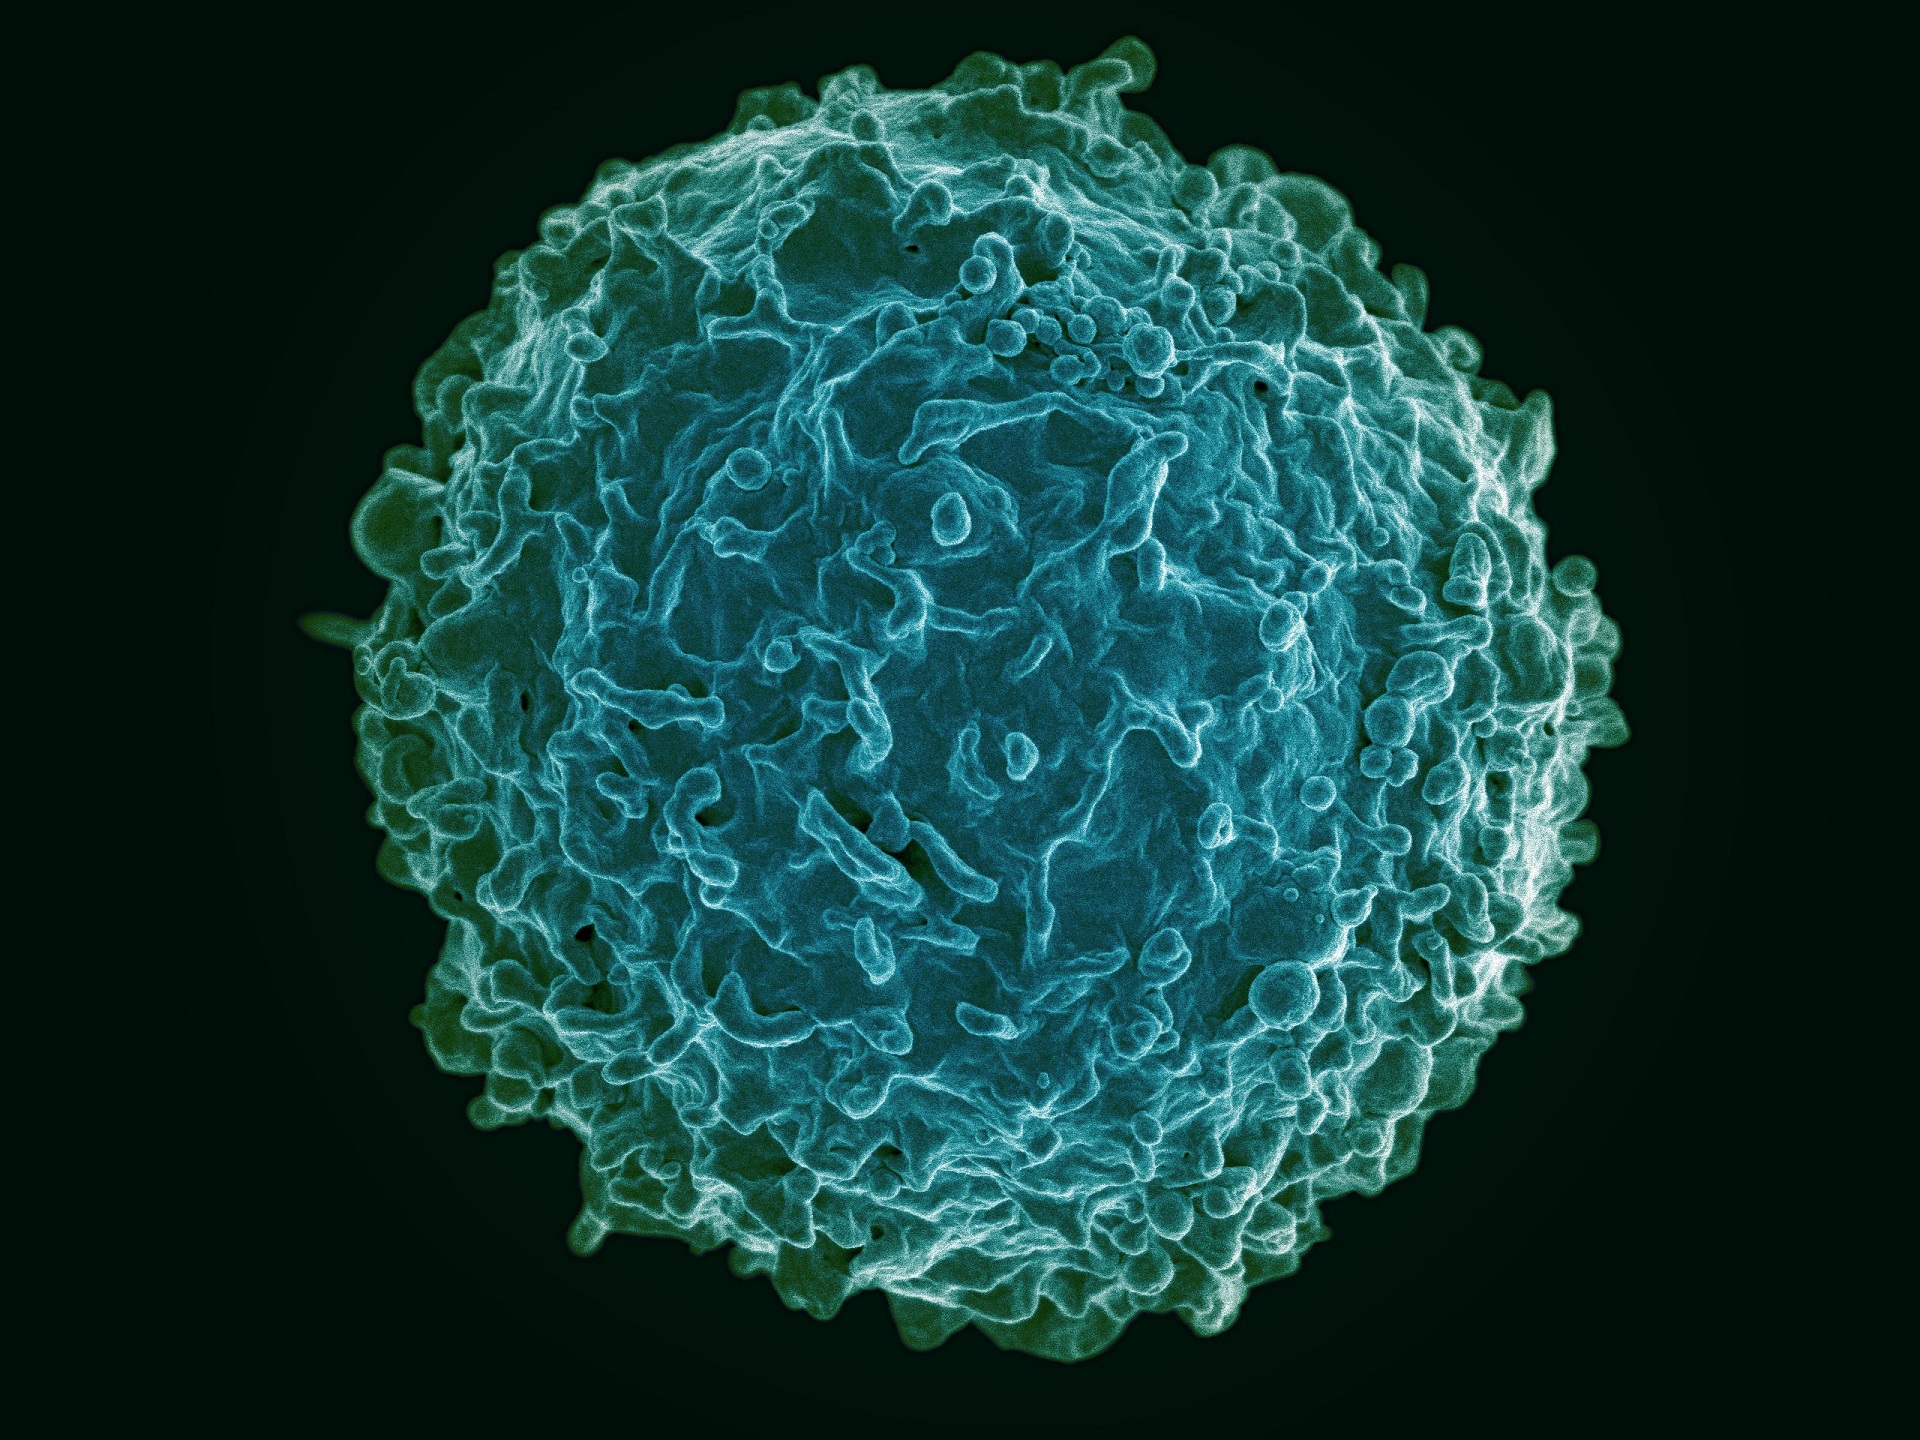 Colorized scanned close up image of a B cell from a human donor